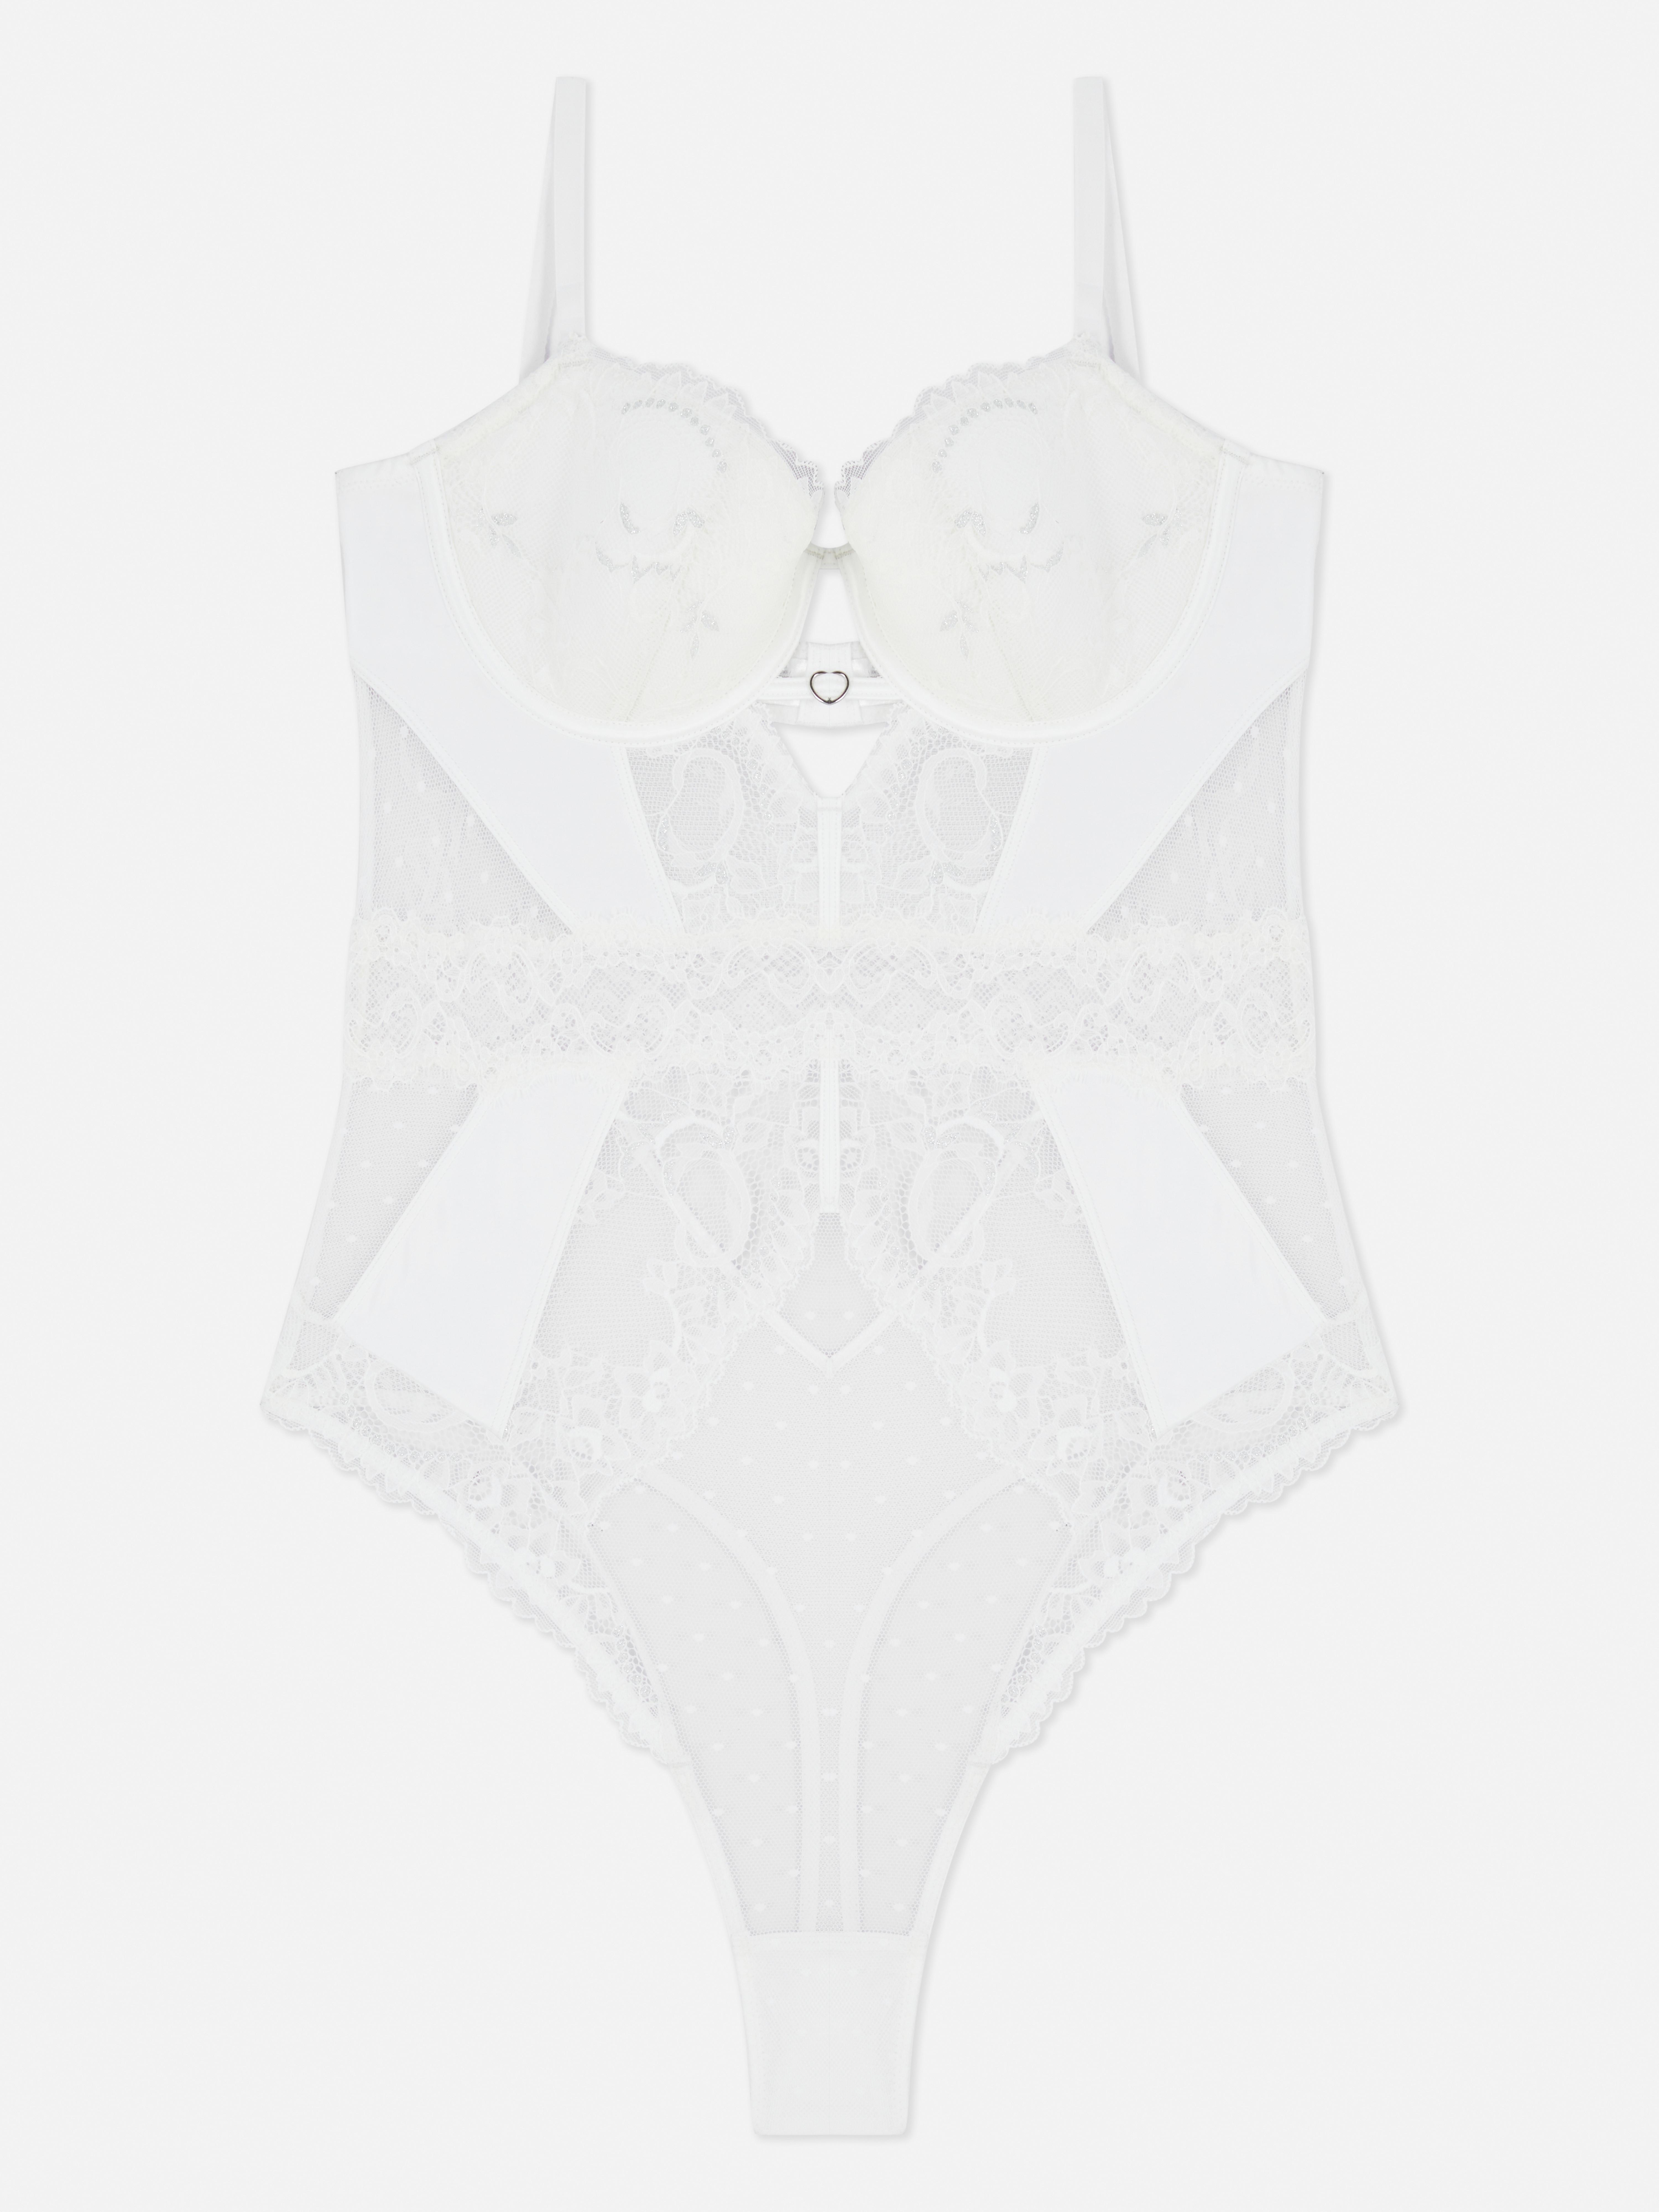 Bridal Lace & Satin Padded Cup Bodysuit